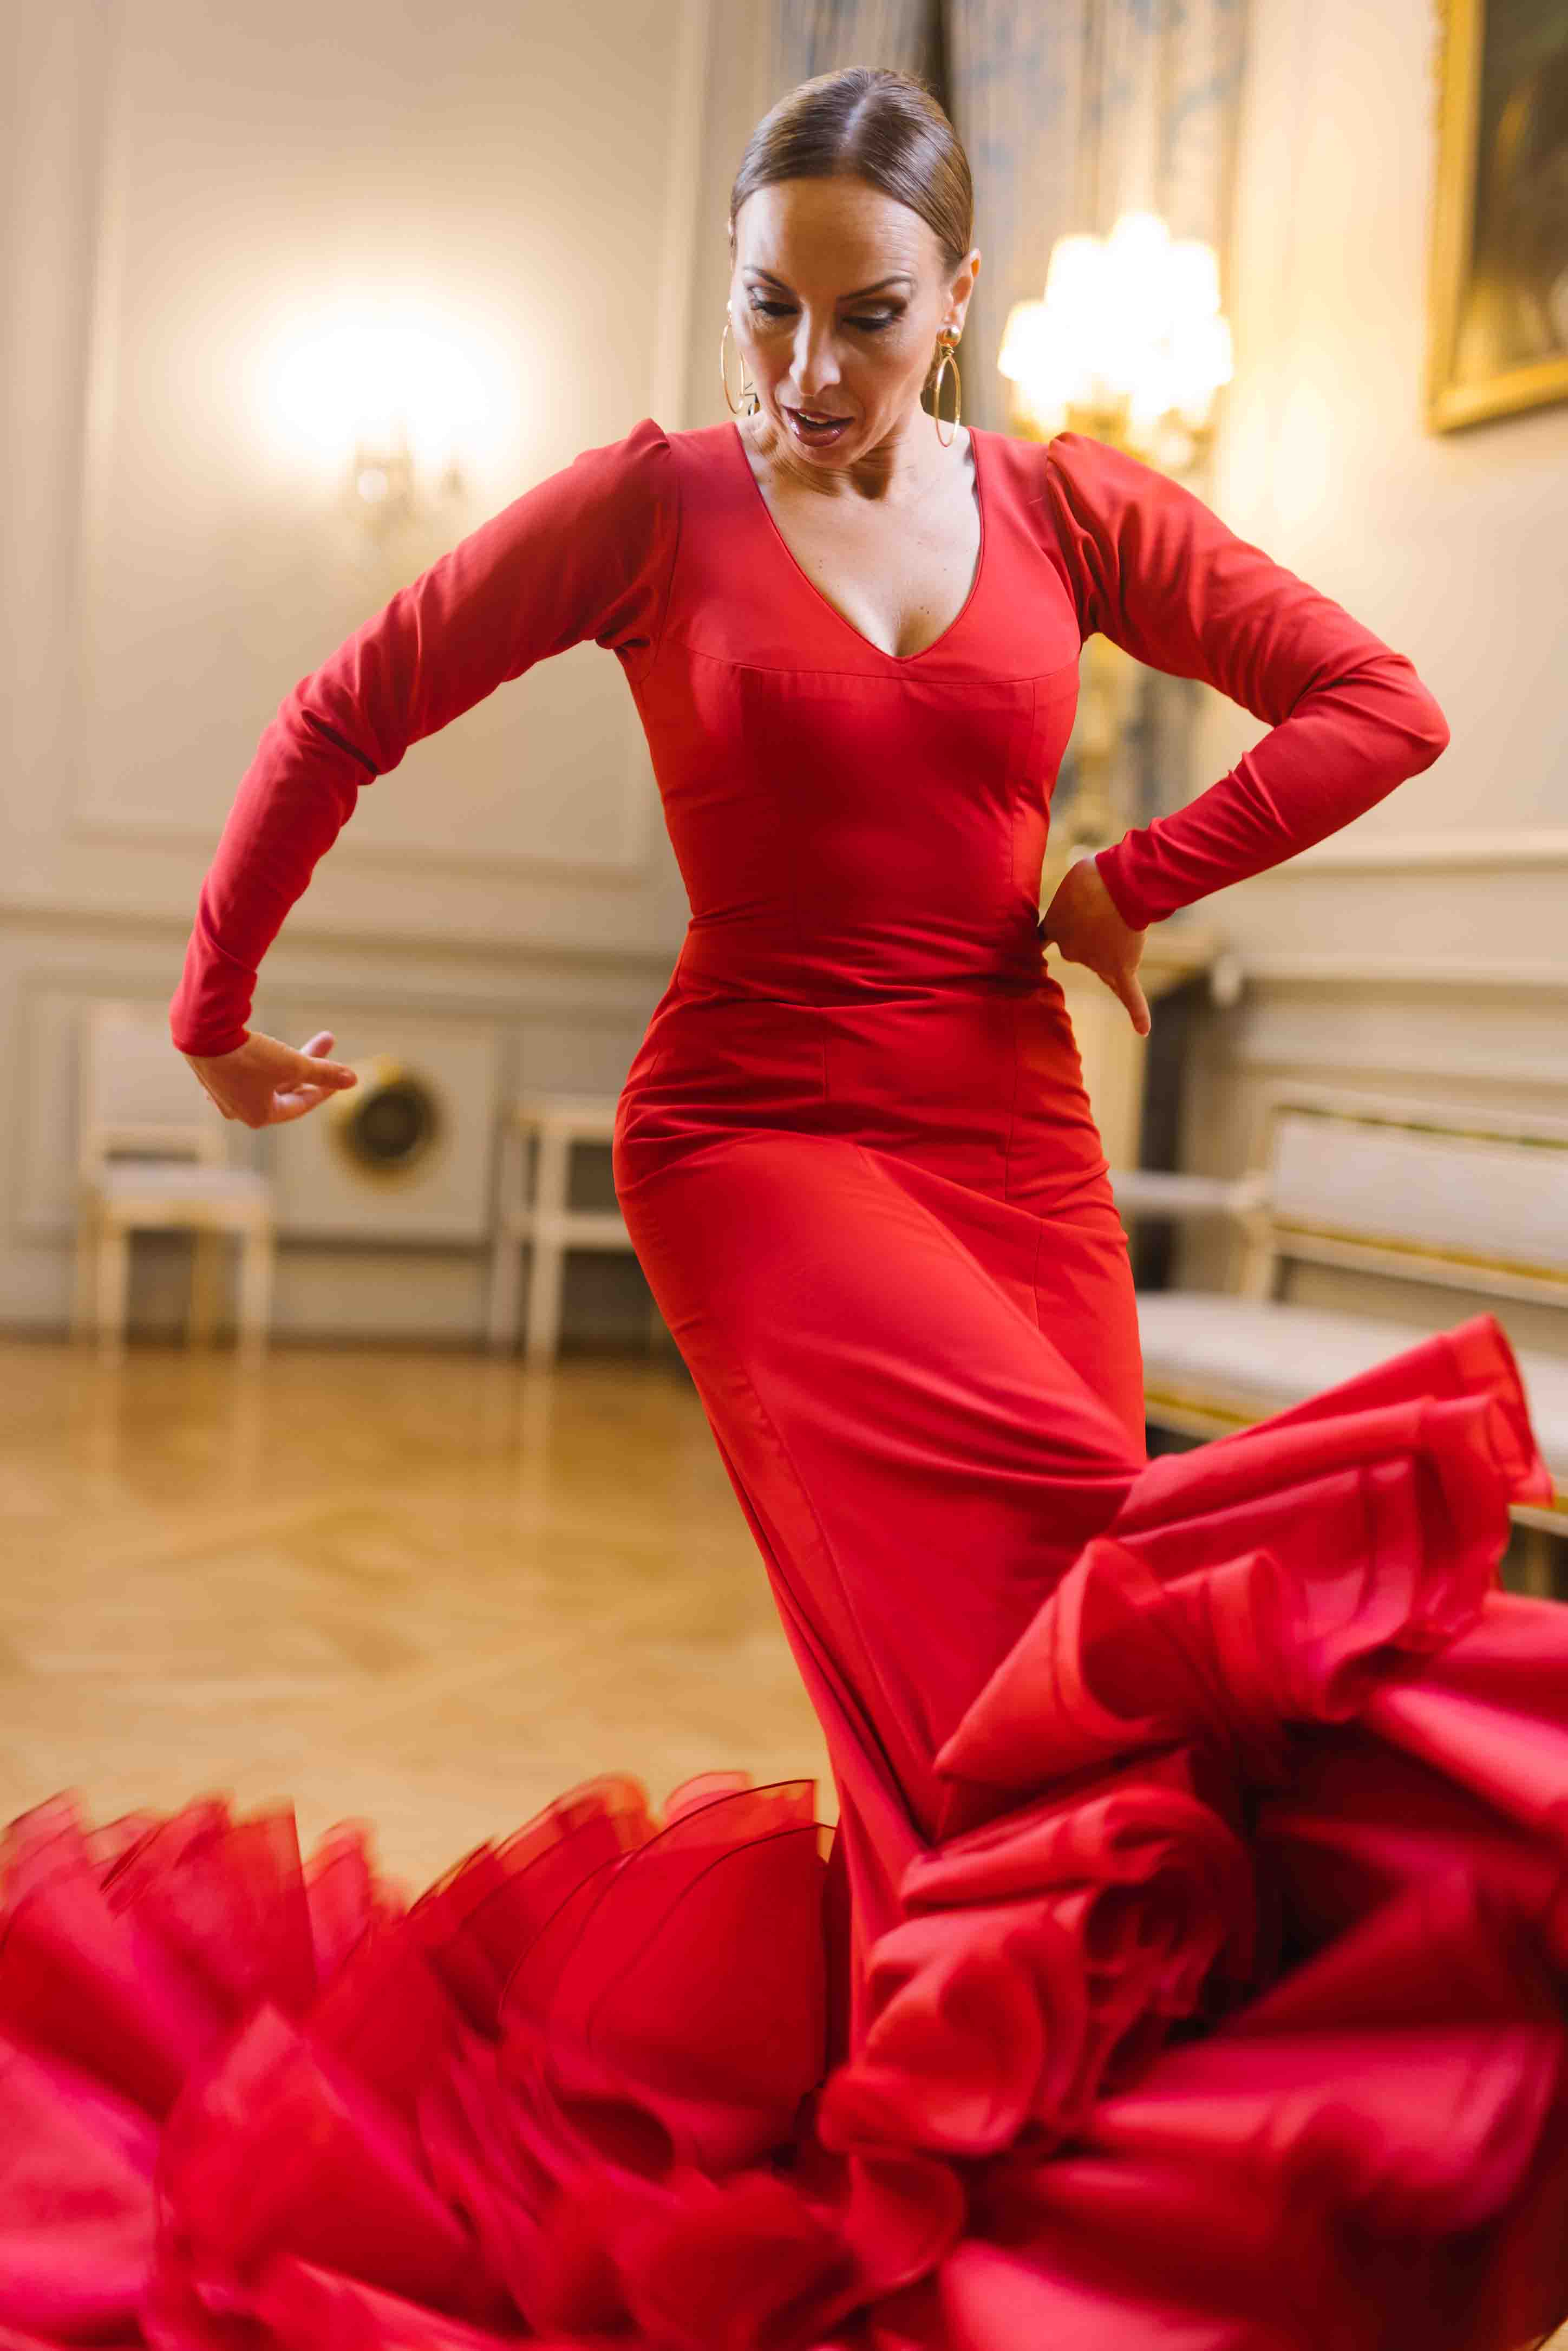 Authentic Flamenco show in Detroit - Authentic Flamenco Tampa: A Traditional Spanish Show